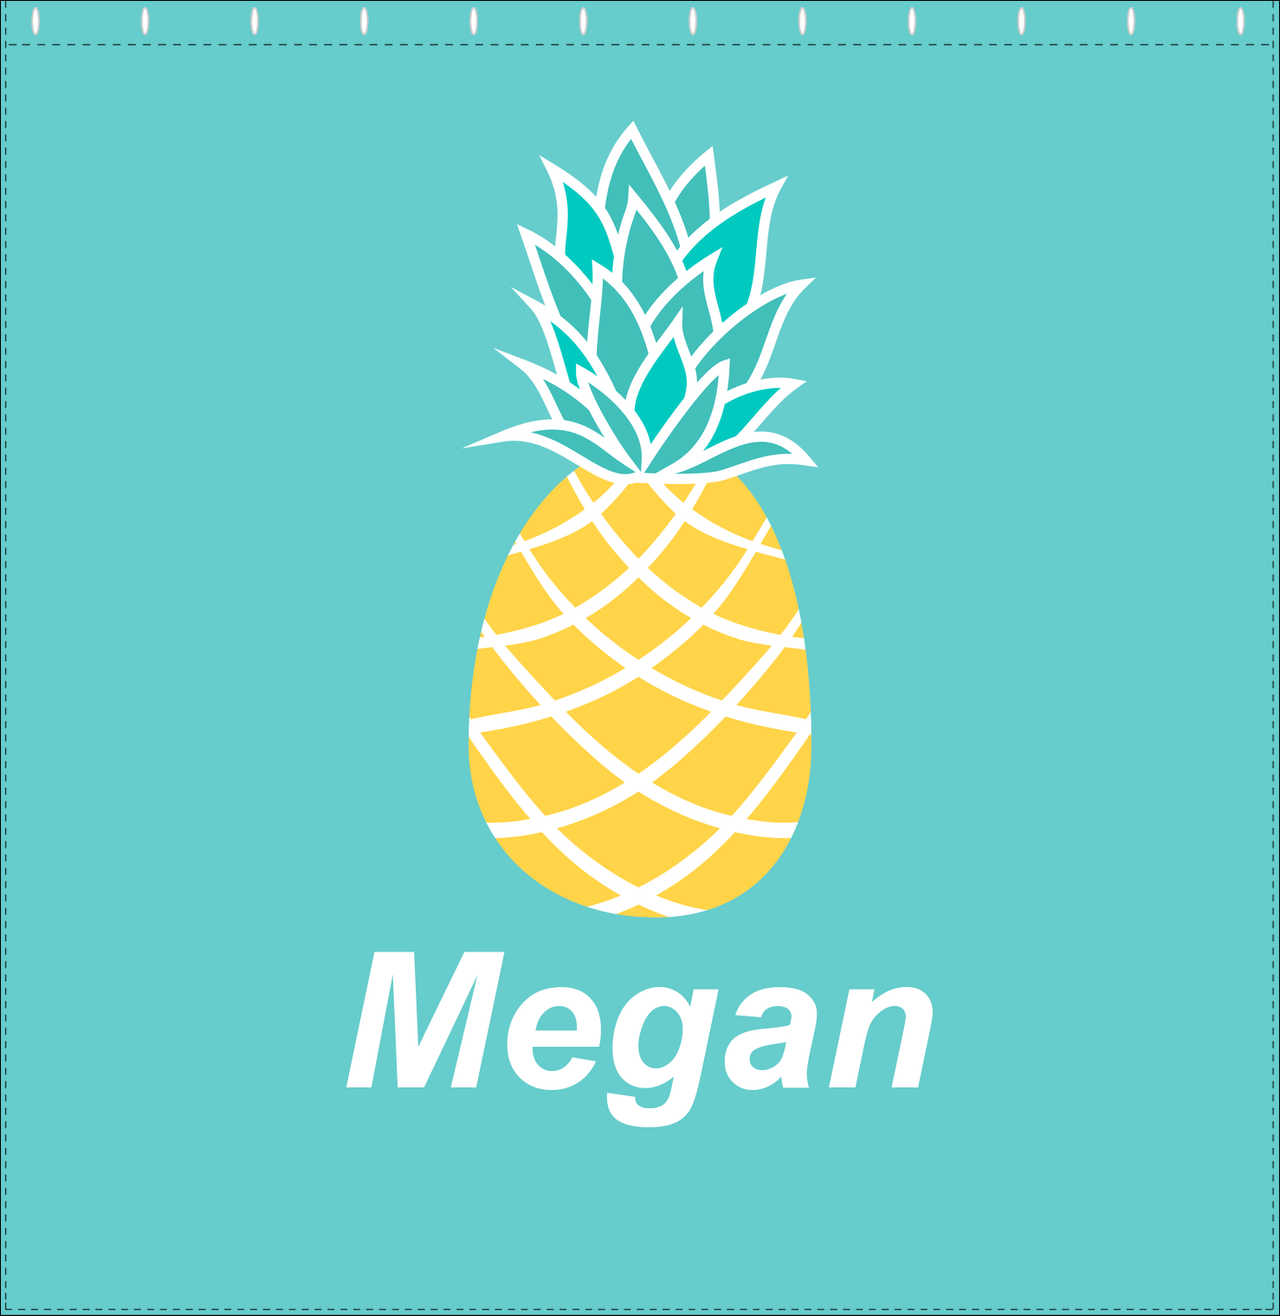 Personalized Pineapple Shower Curtain - Text Below Big Pineapple - Decorate View